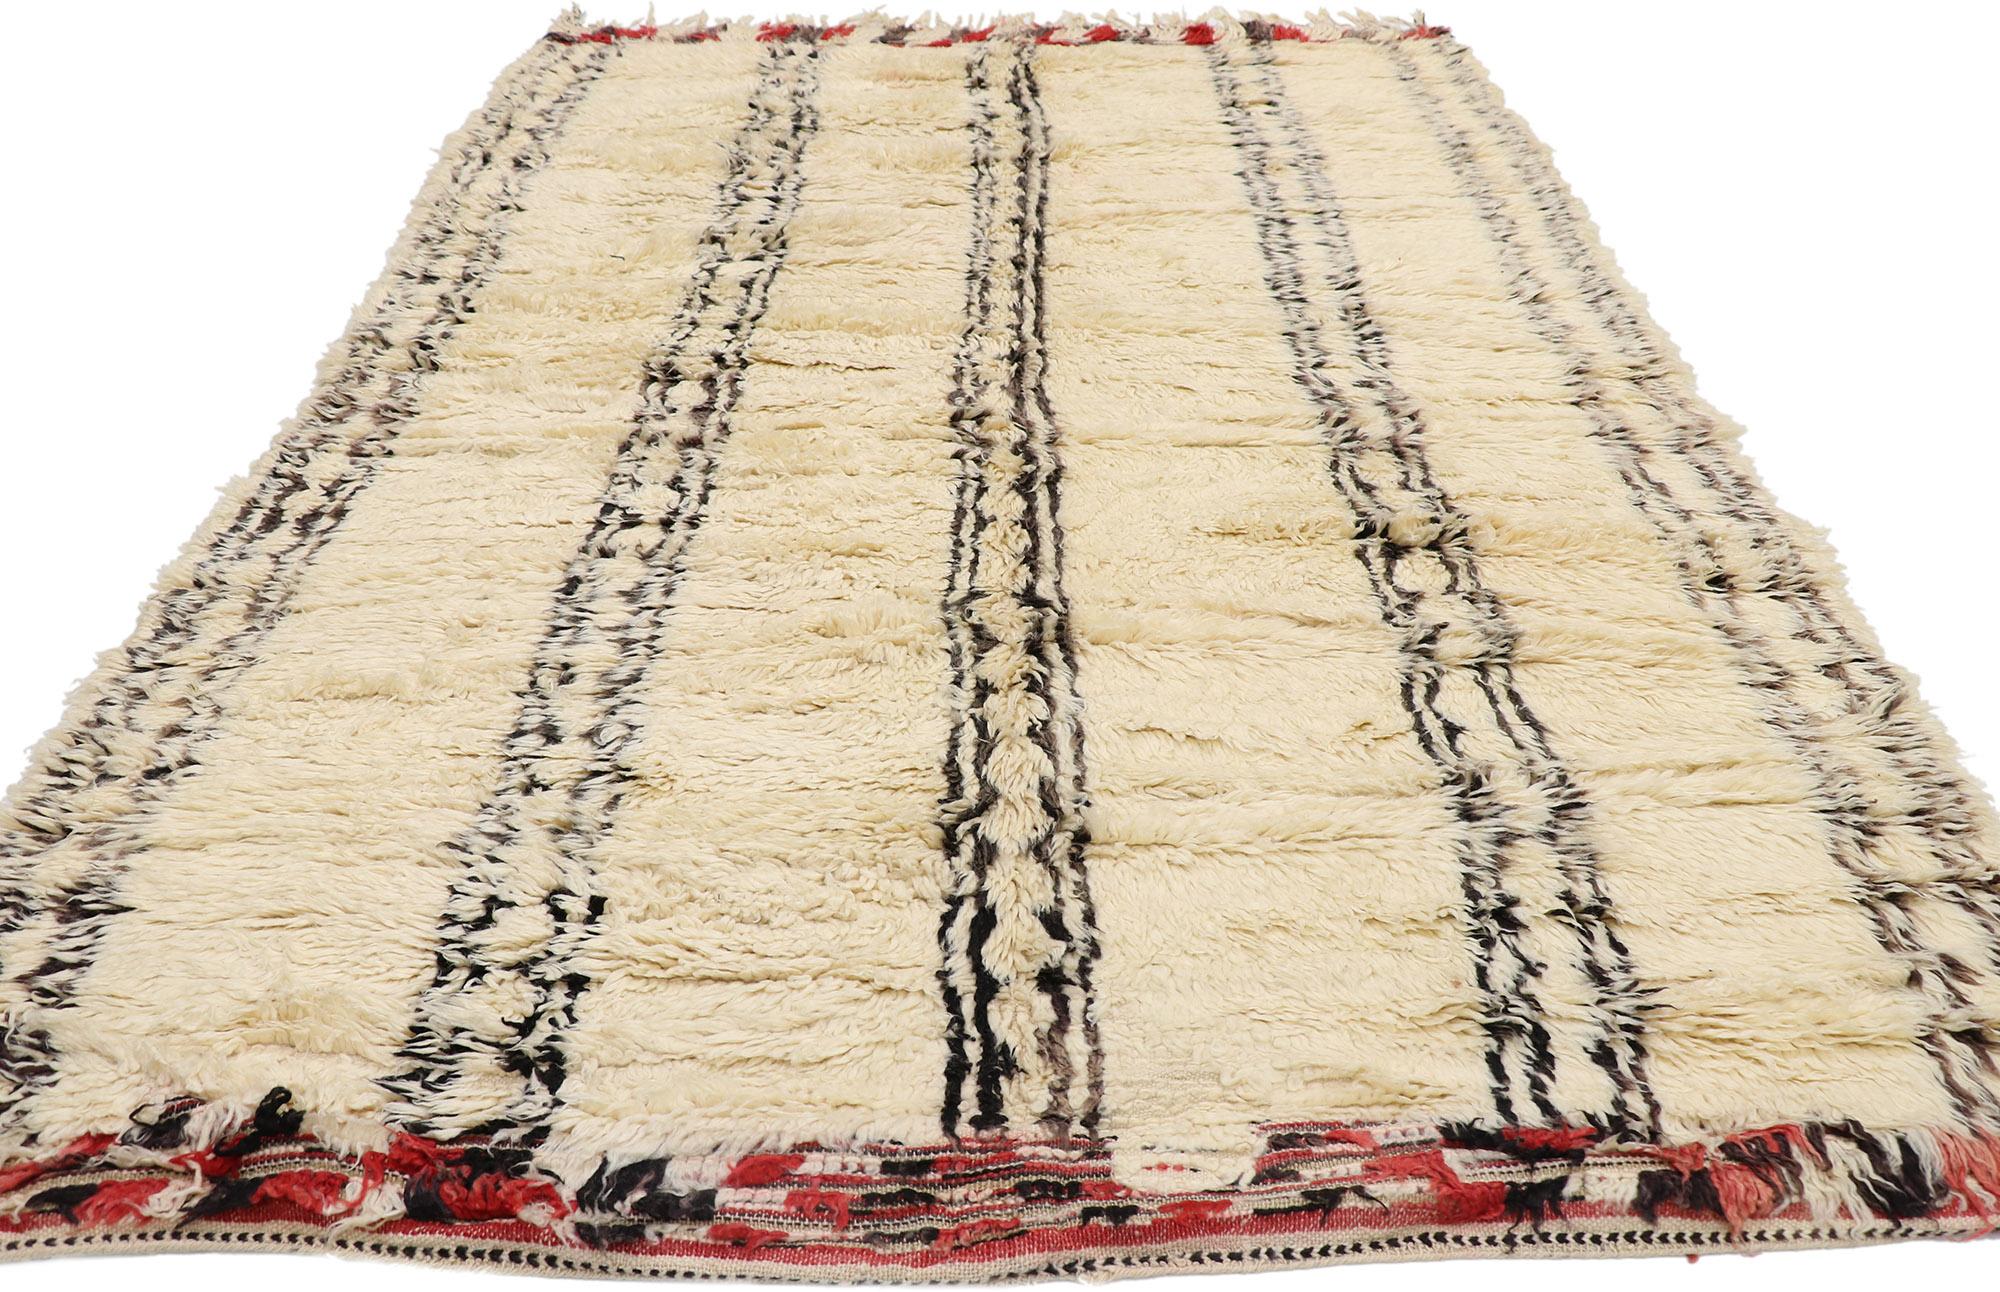 Hand-Knotted Vintage Berber Beni Ourain Moroccan Rug with Mid-Century Modern Style